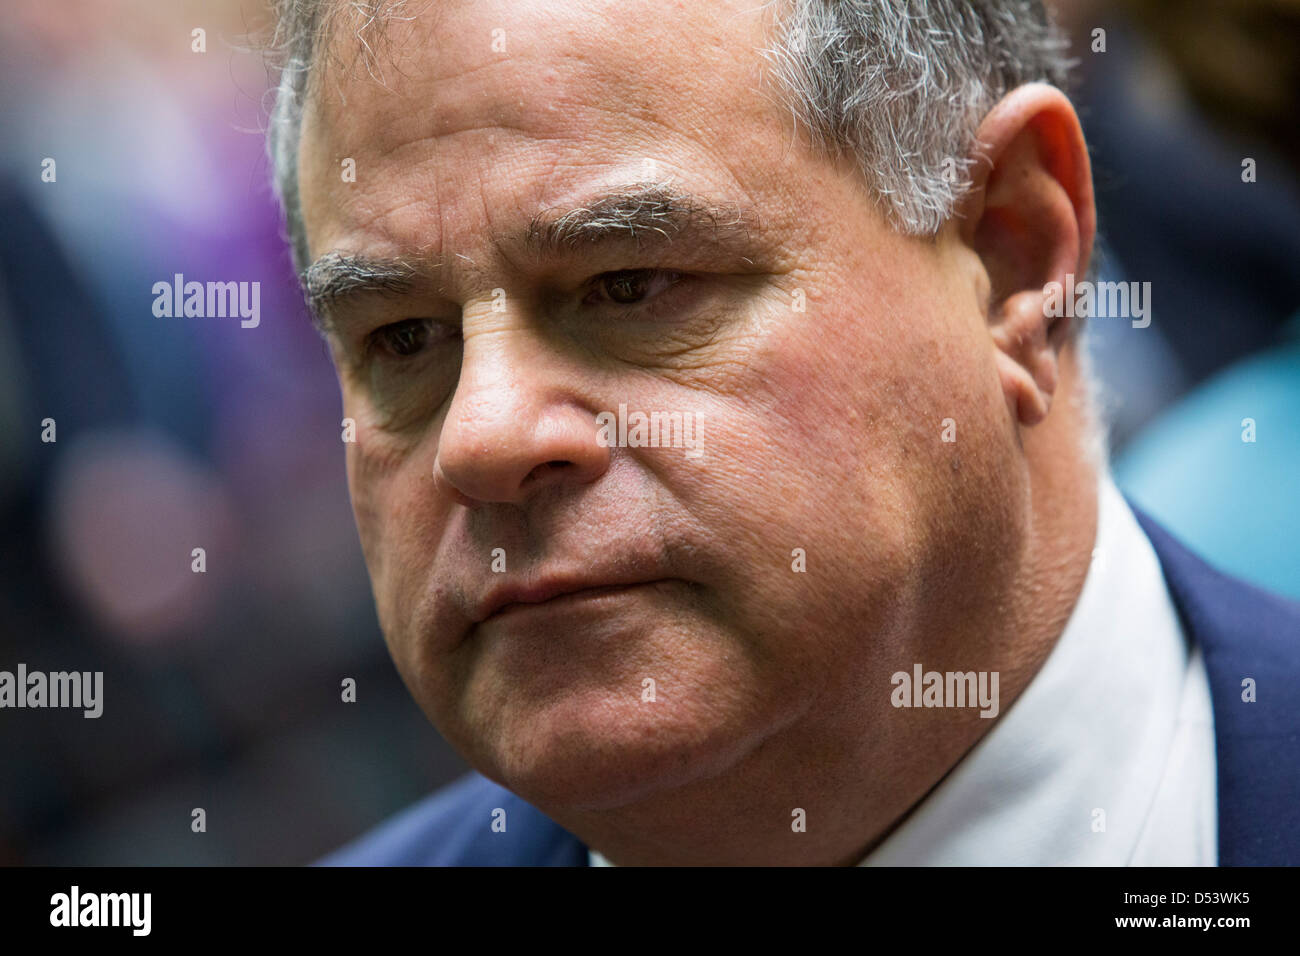 Joe Carrabba, Chairman, President and CEO of Cliffs Natural Resources, Inc., Stock Photo